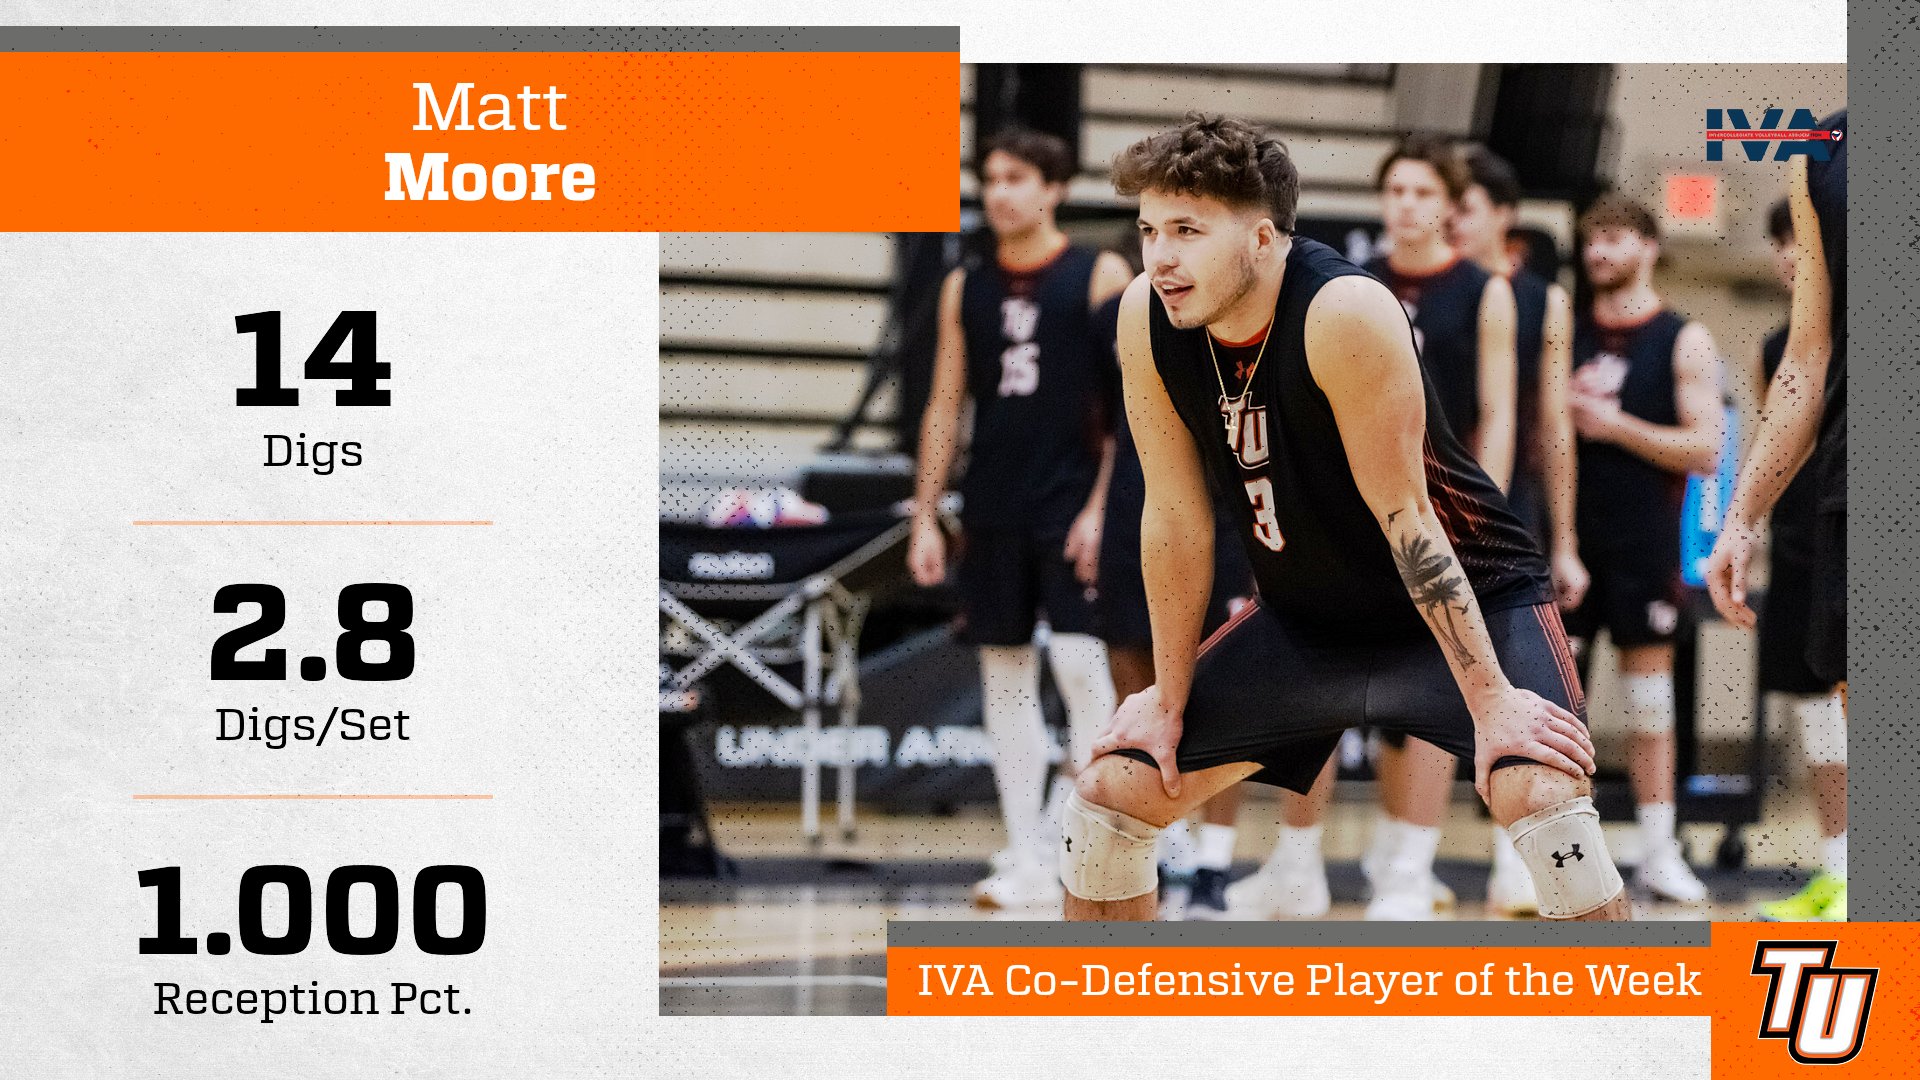 Moore collects IVA Player of the Week